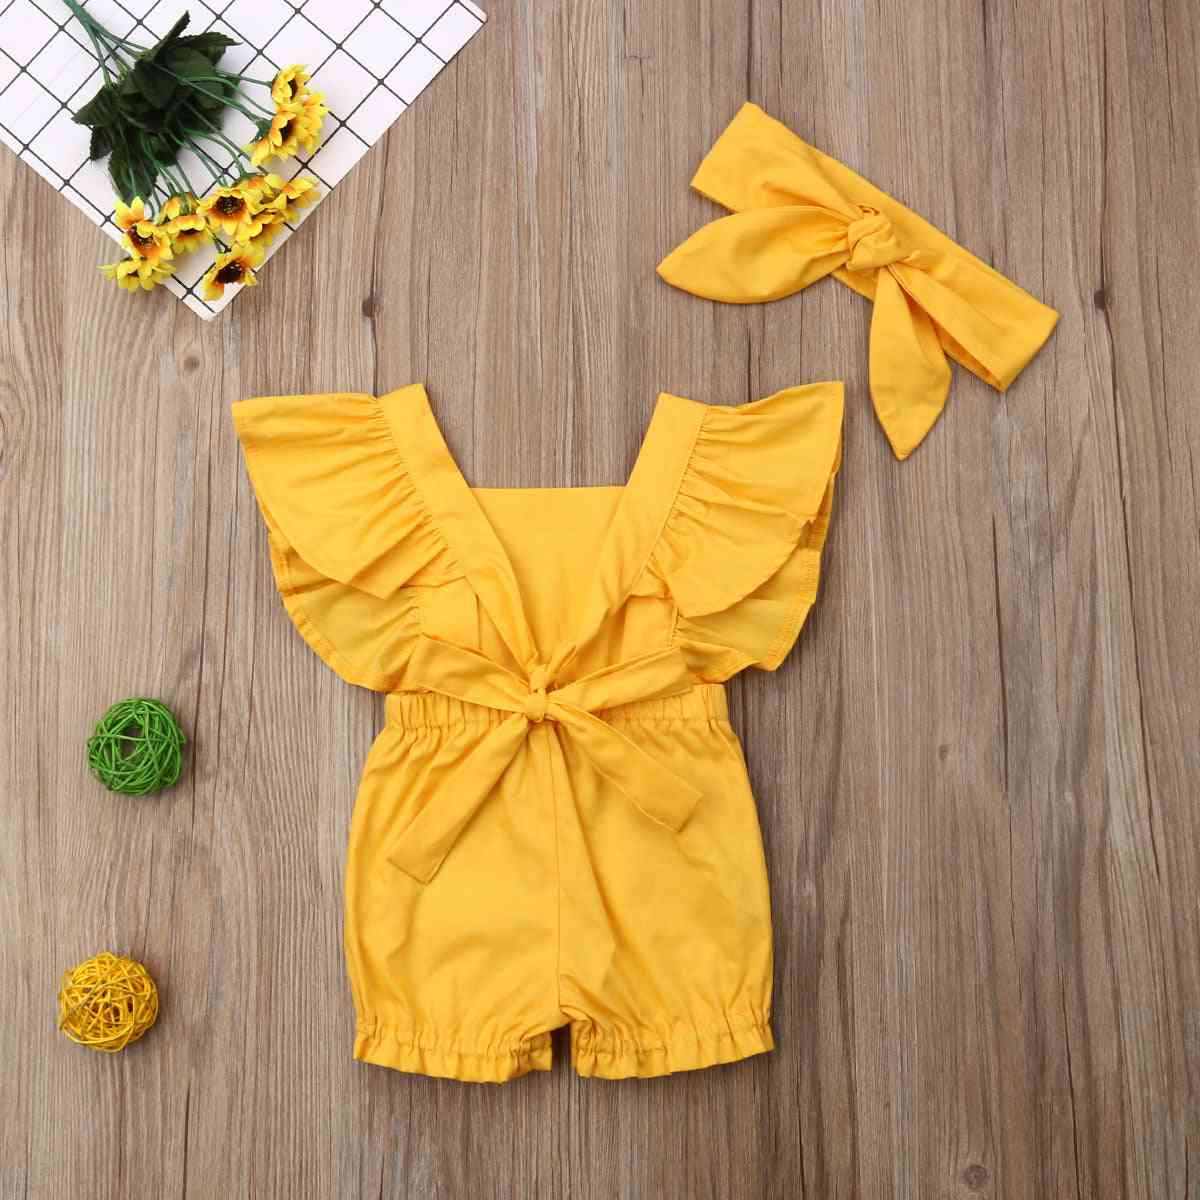 Newborn Baby Girl Clothes Fly Sleeve Ruffle Romper Jumpsuit Headband Outfits Set